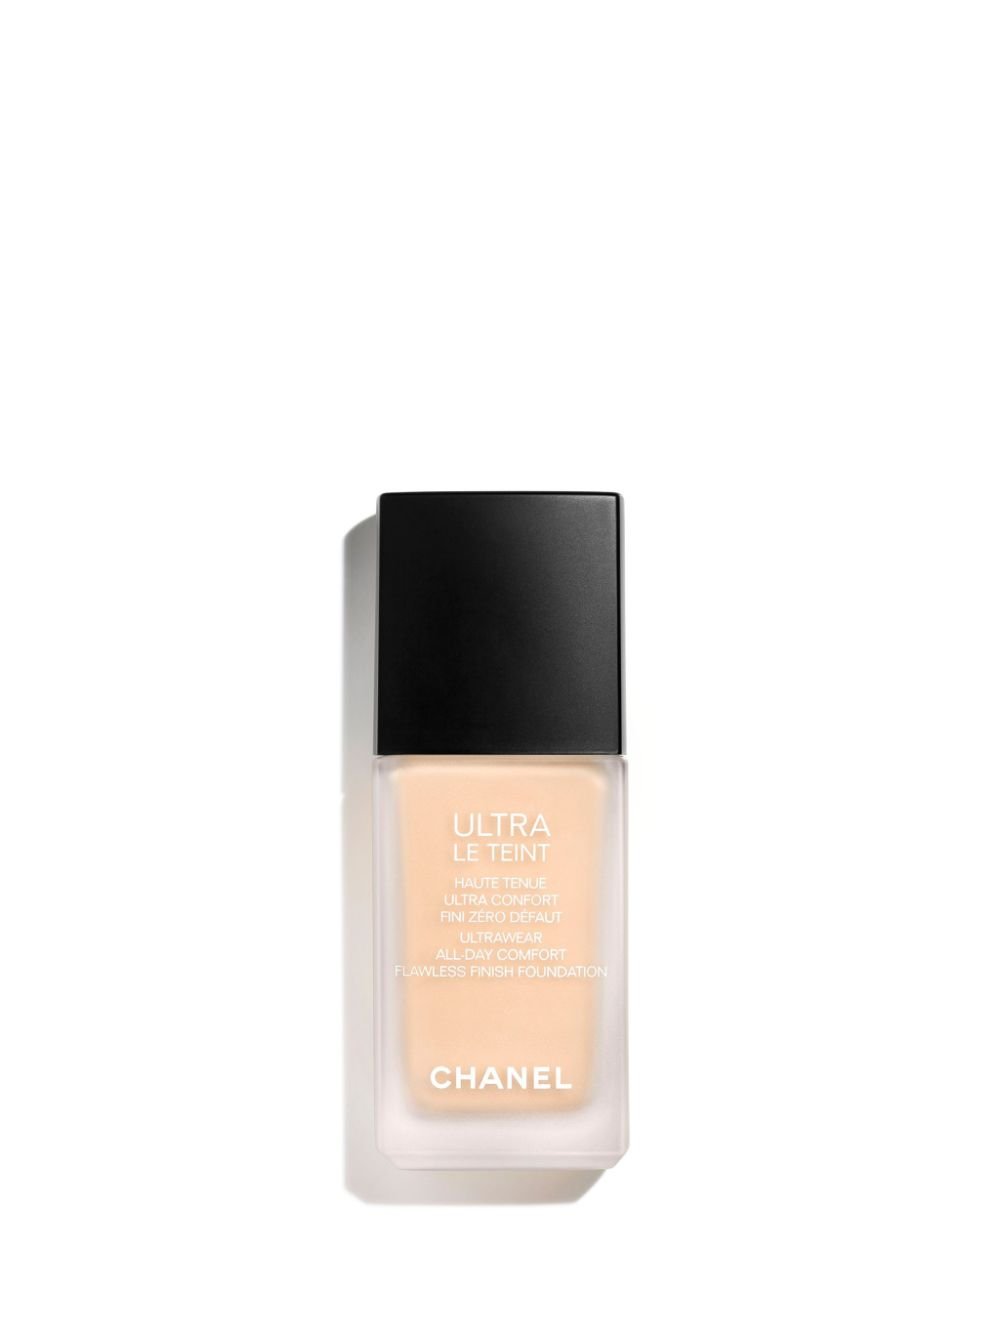 Image of <B>CHANEL<BR></B>ULTRA LE TEINT ULTRAWEAR ALL-DAY COMFORT FLAWLESS FINISH FOUNDATION